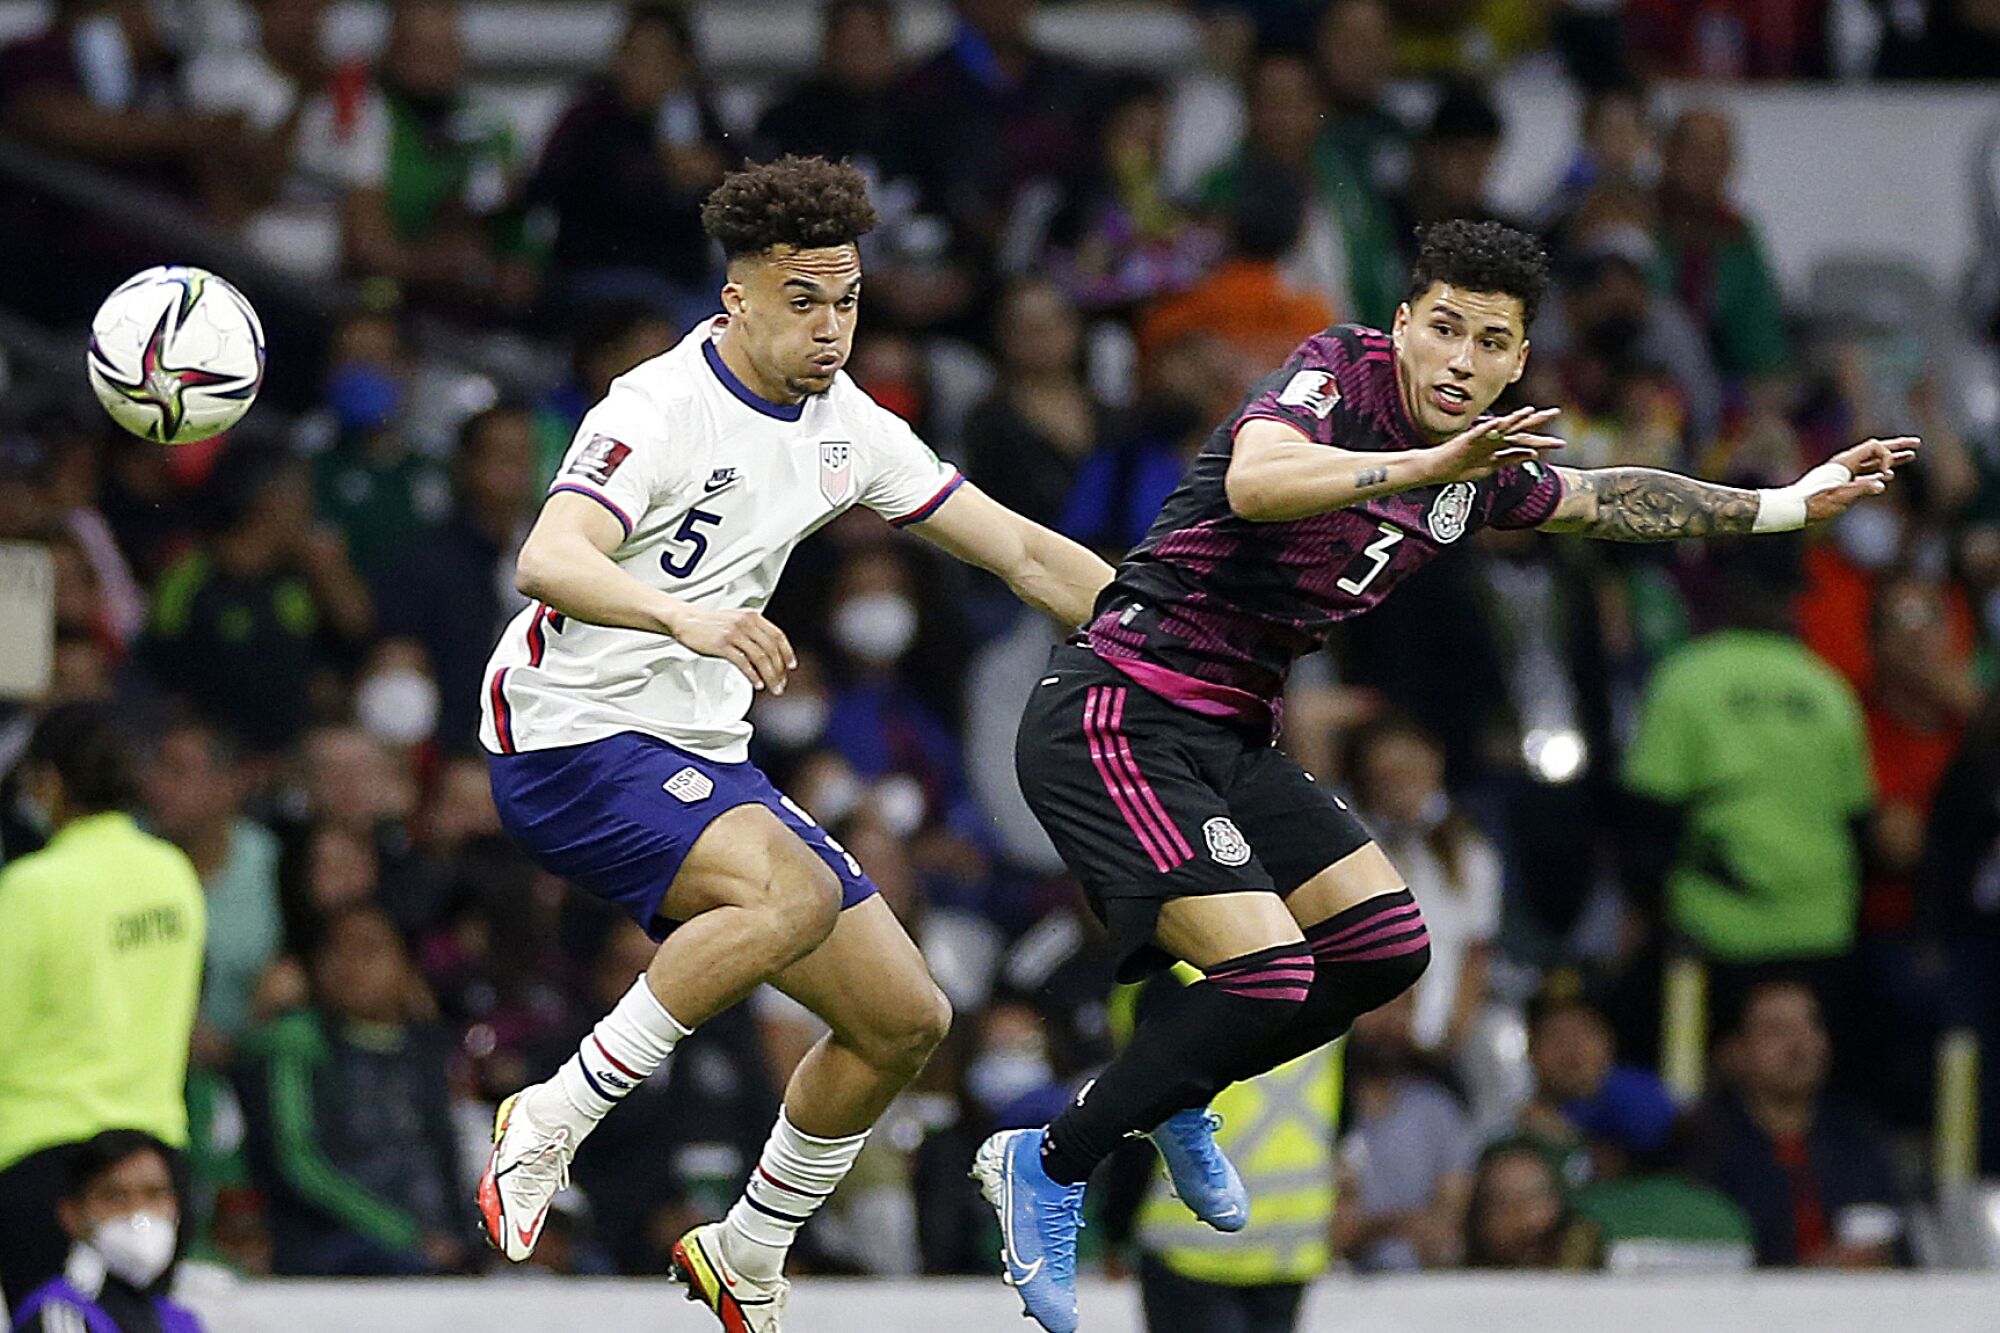 U.S. defender Antonee Robinson, left, and Mexico defender Jorge Sanchez jump for the ball.